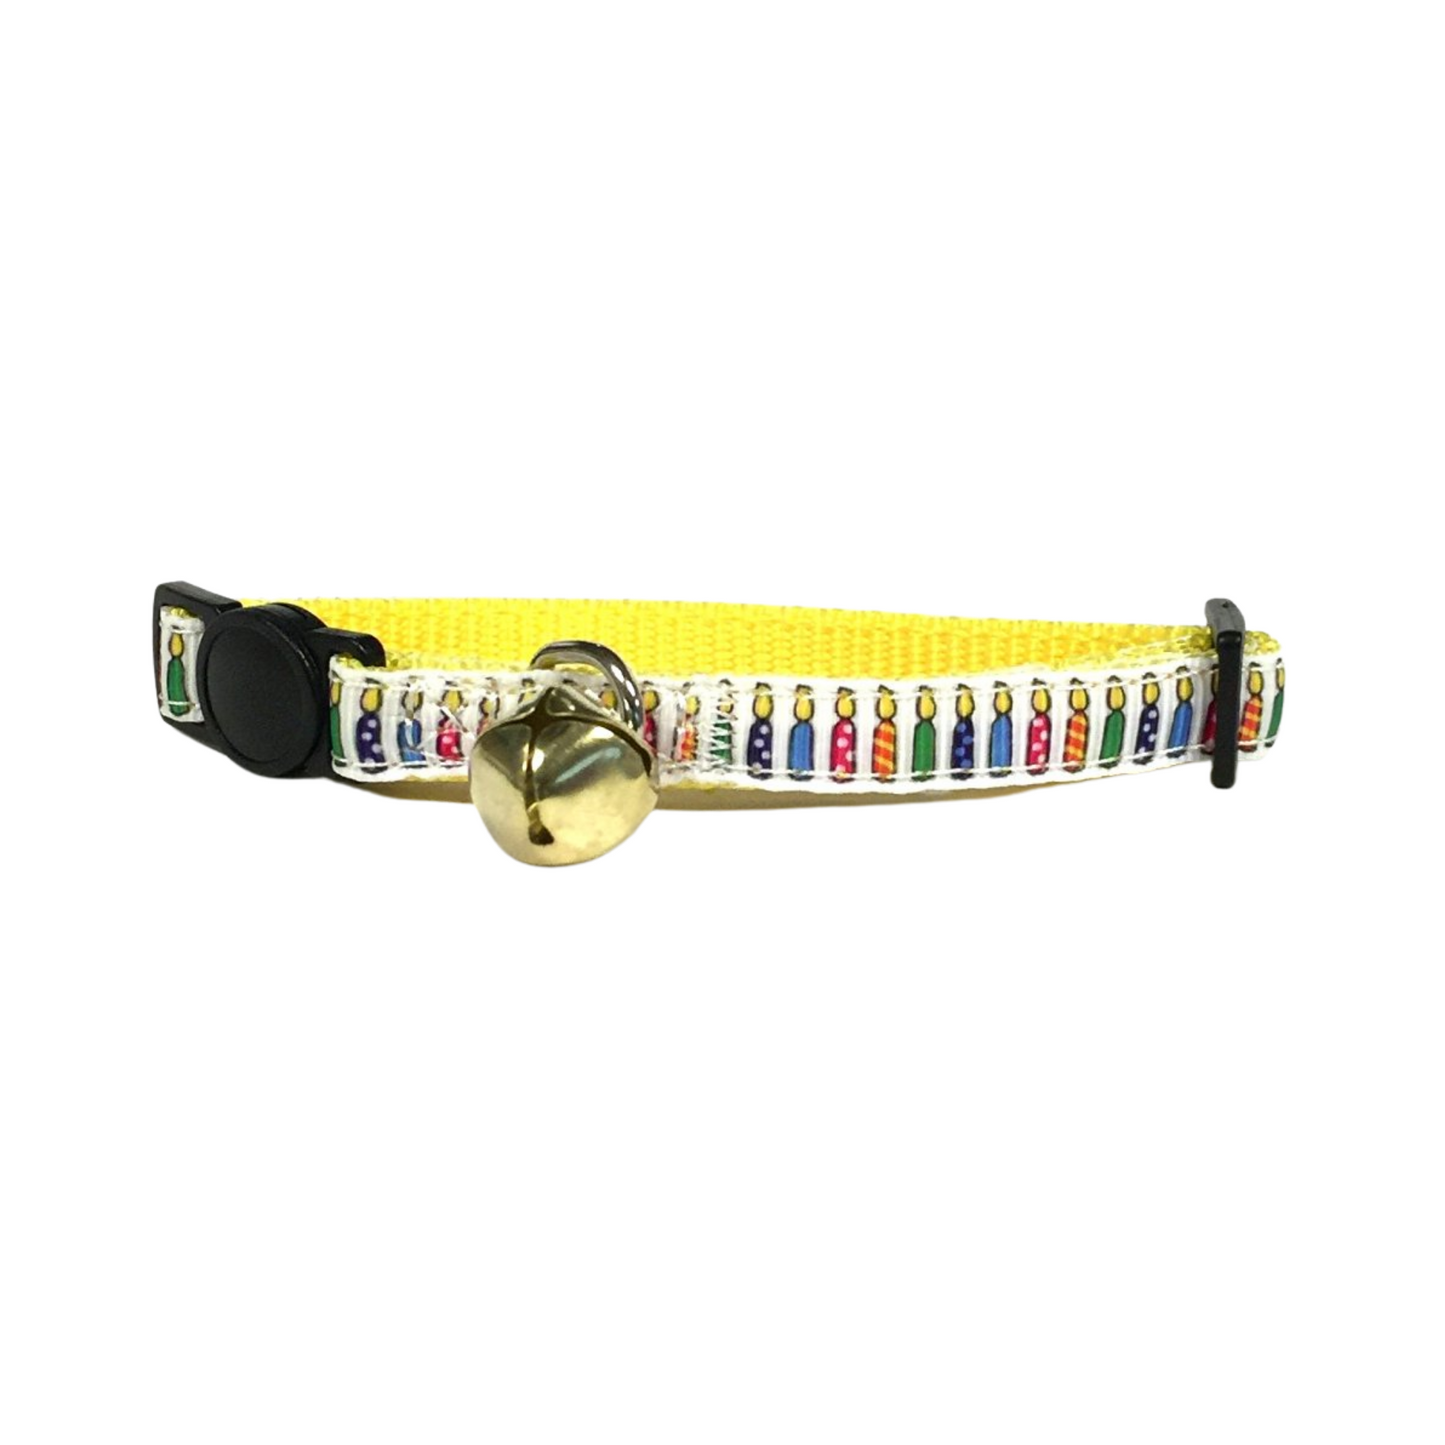 Midlee Birthday Cat Collar with Safety Buckle